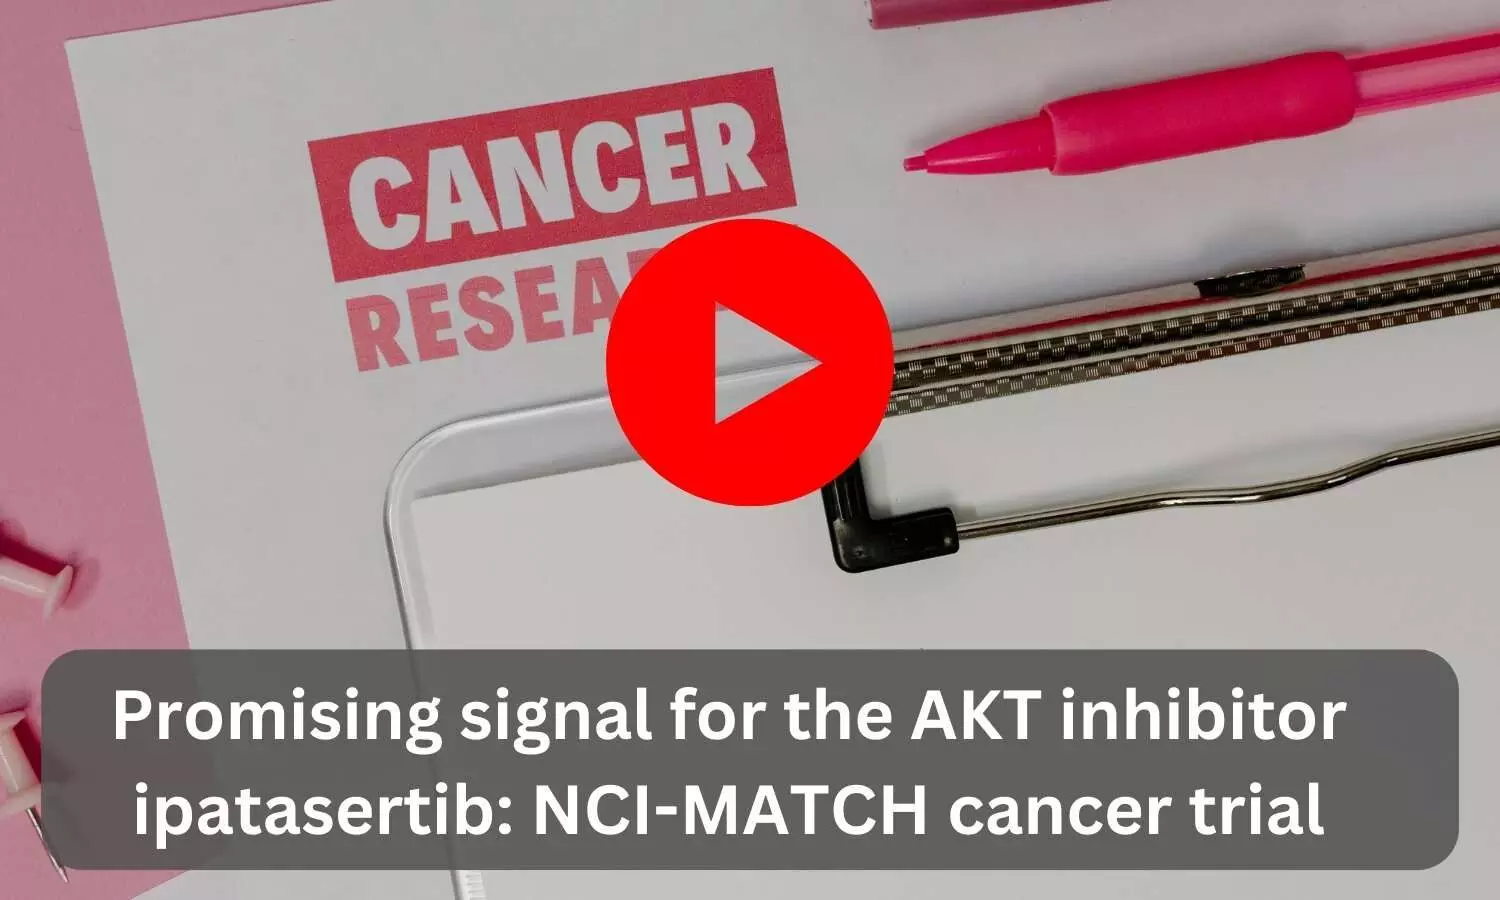 Promising signal for the AKT inhibitor ipatasertib: NCI-MATCH cancer trial